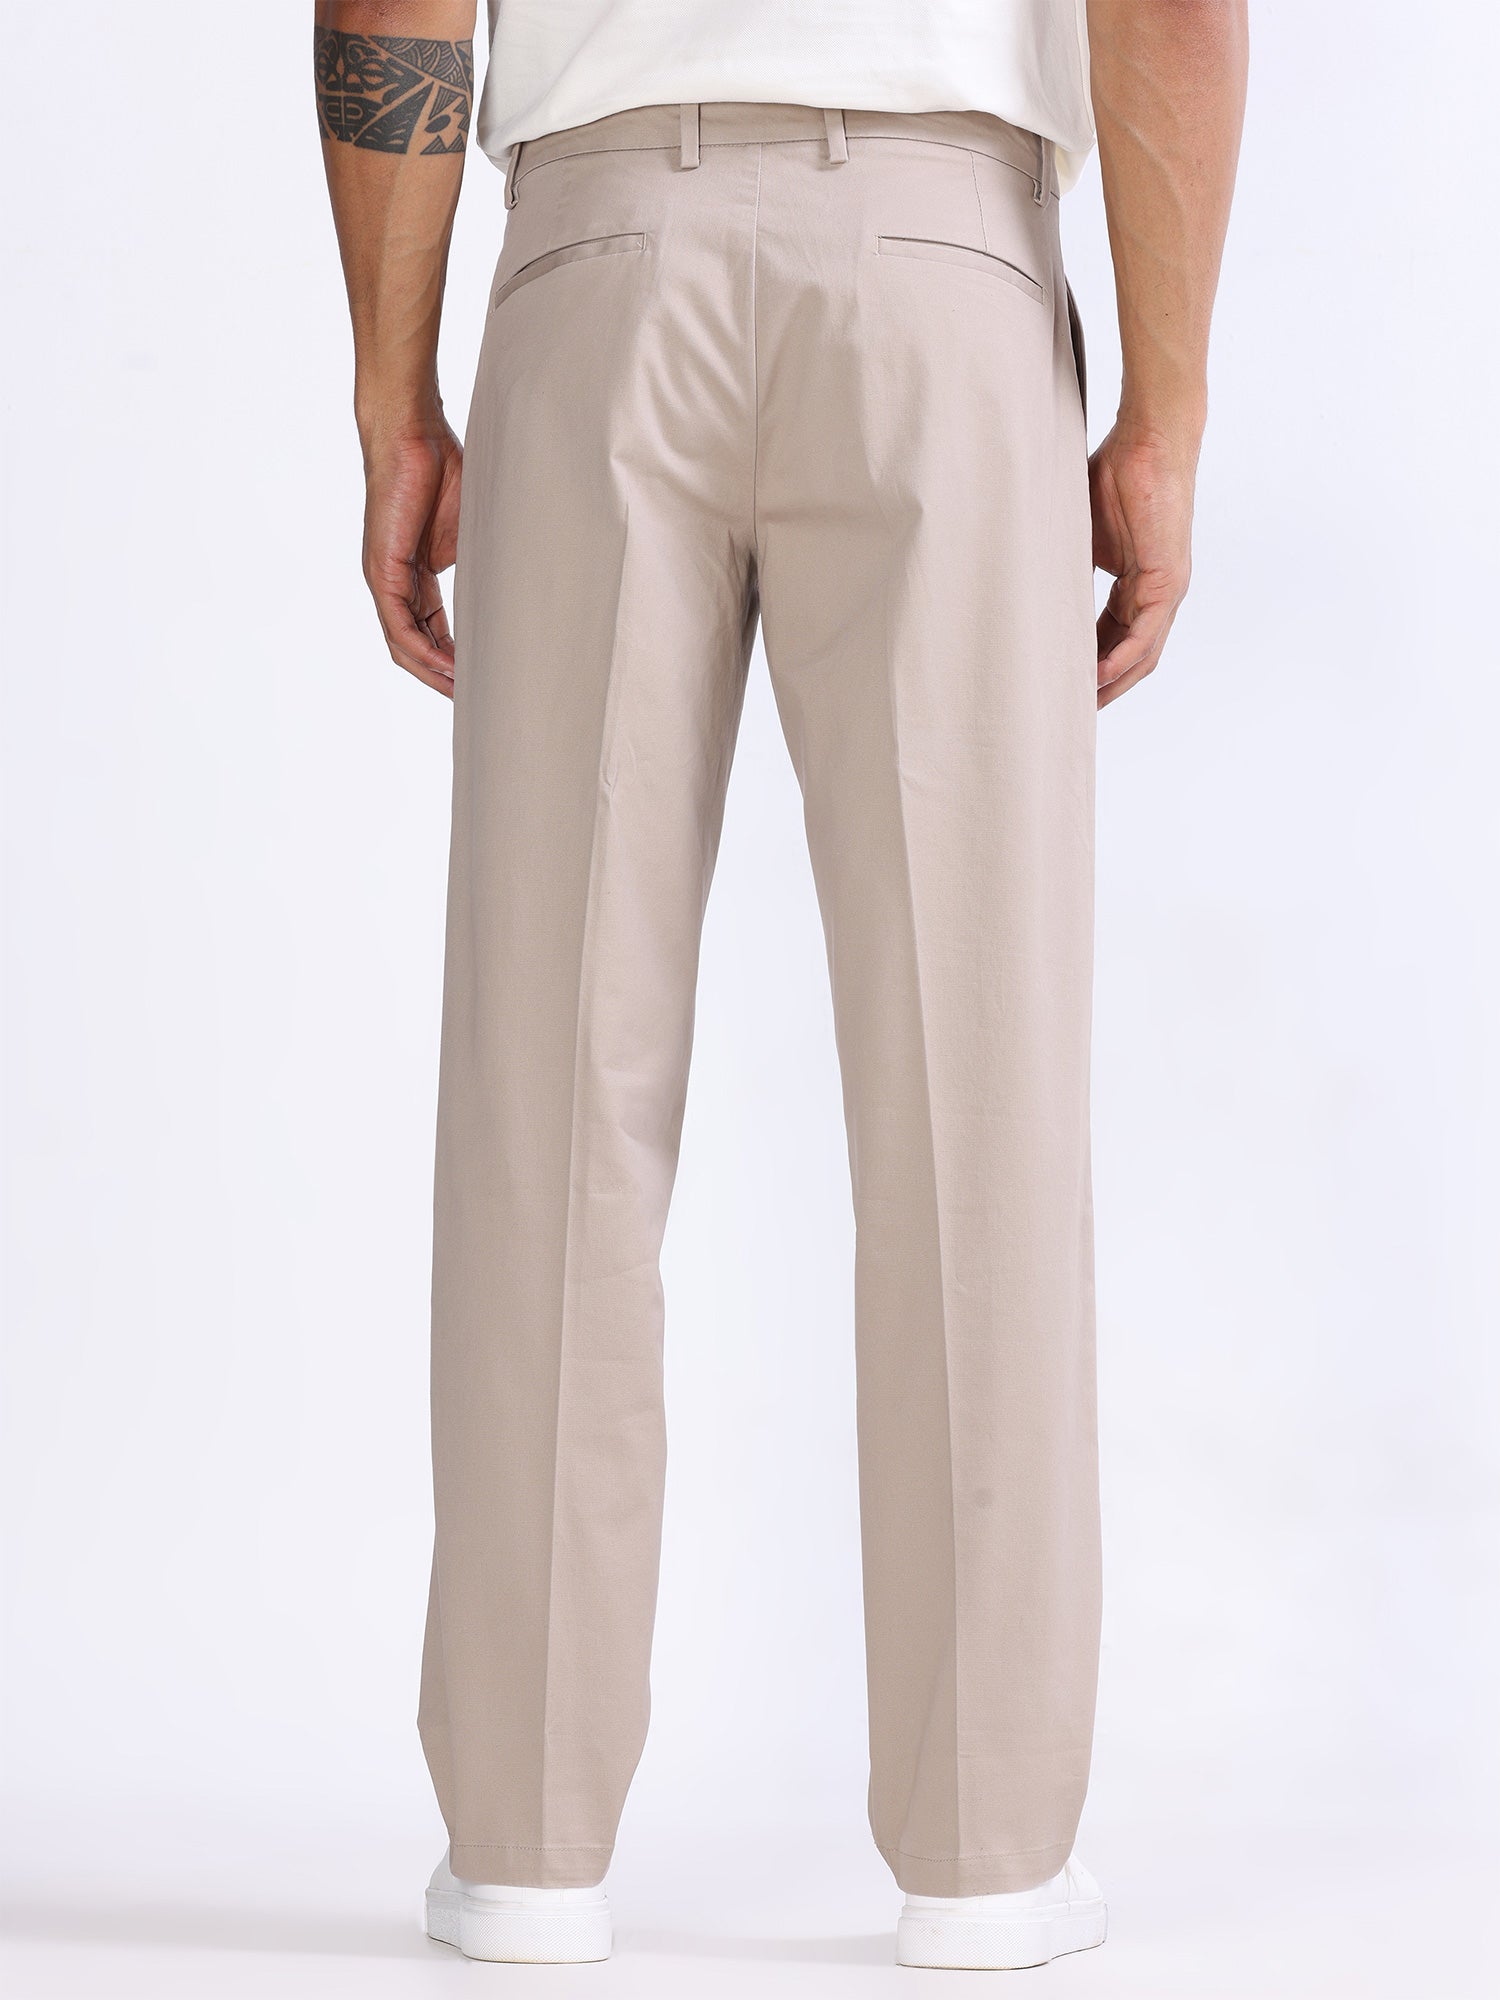 Buy Beige Plain Unstitched Trouser Cotton Wool Pant Fabric for Best Price,  Reviews, Free Shipping